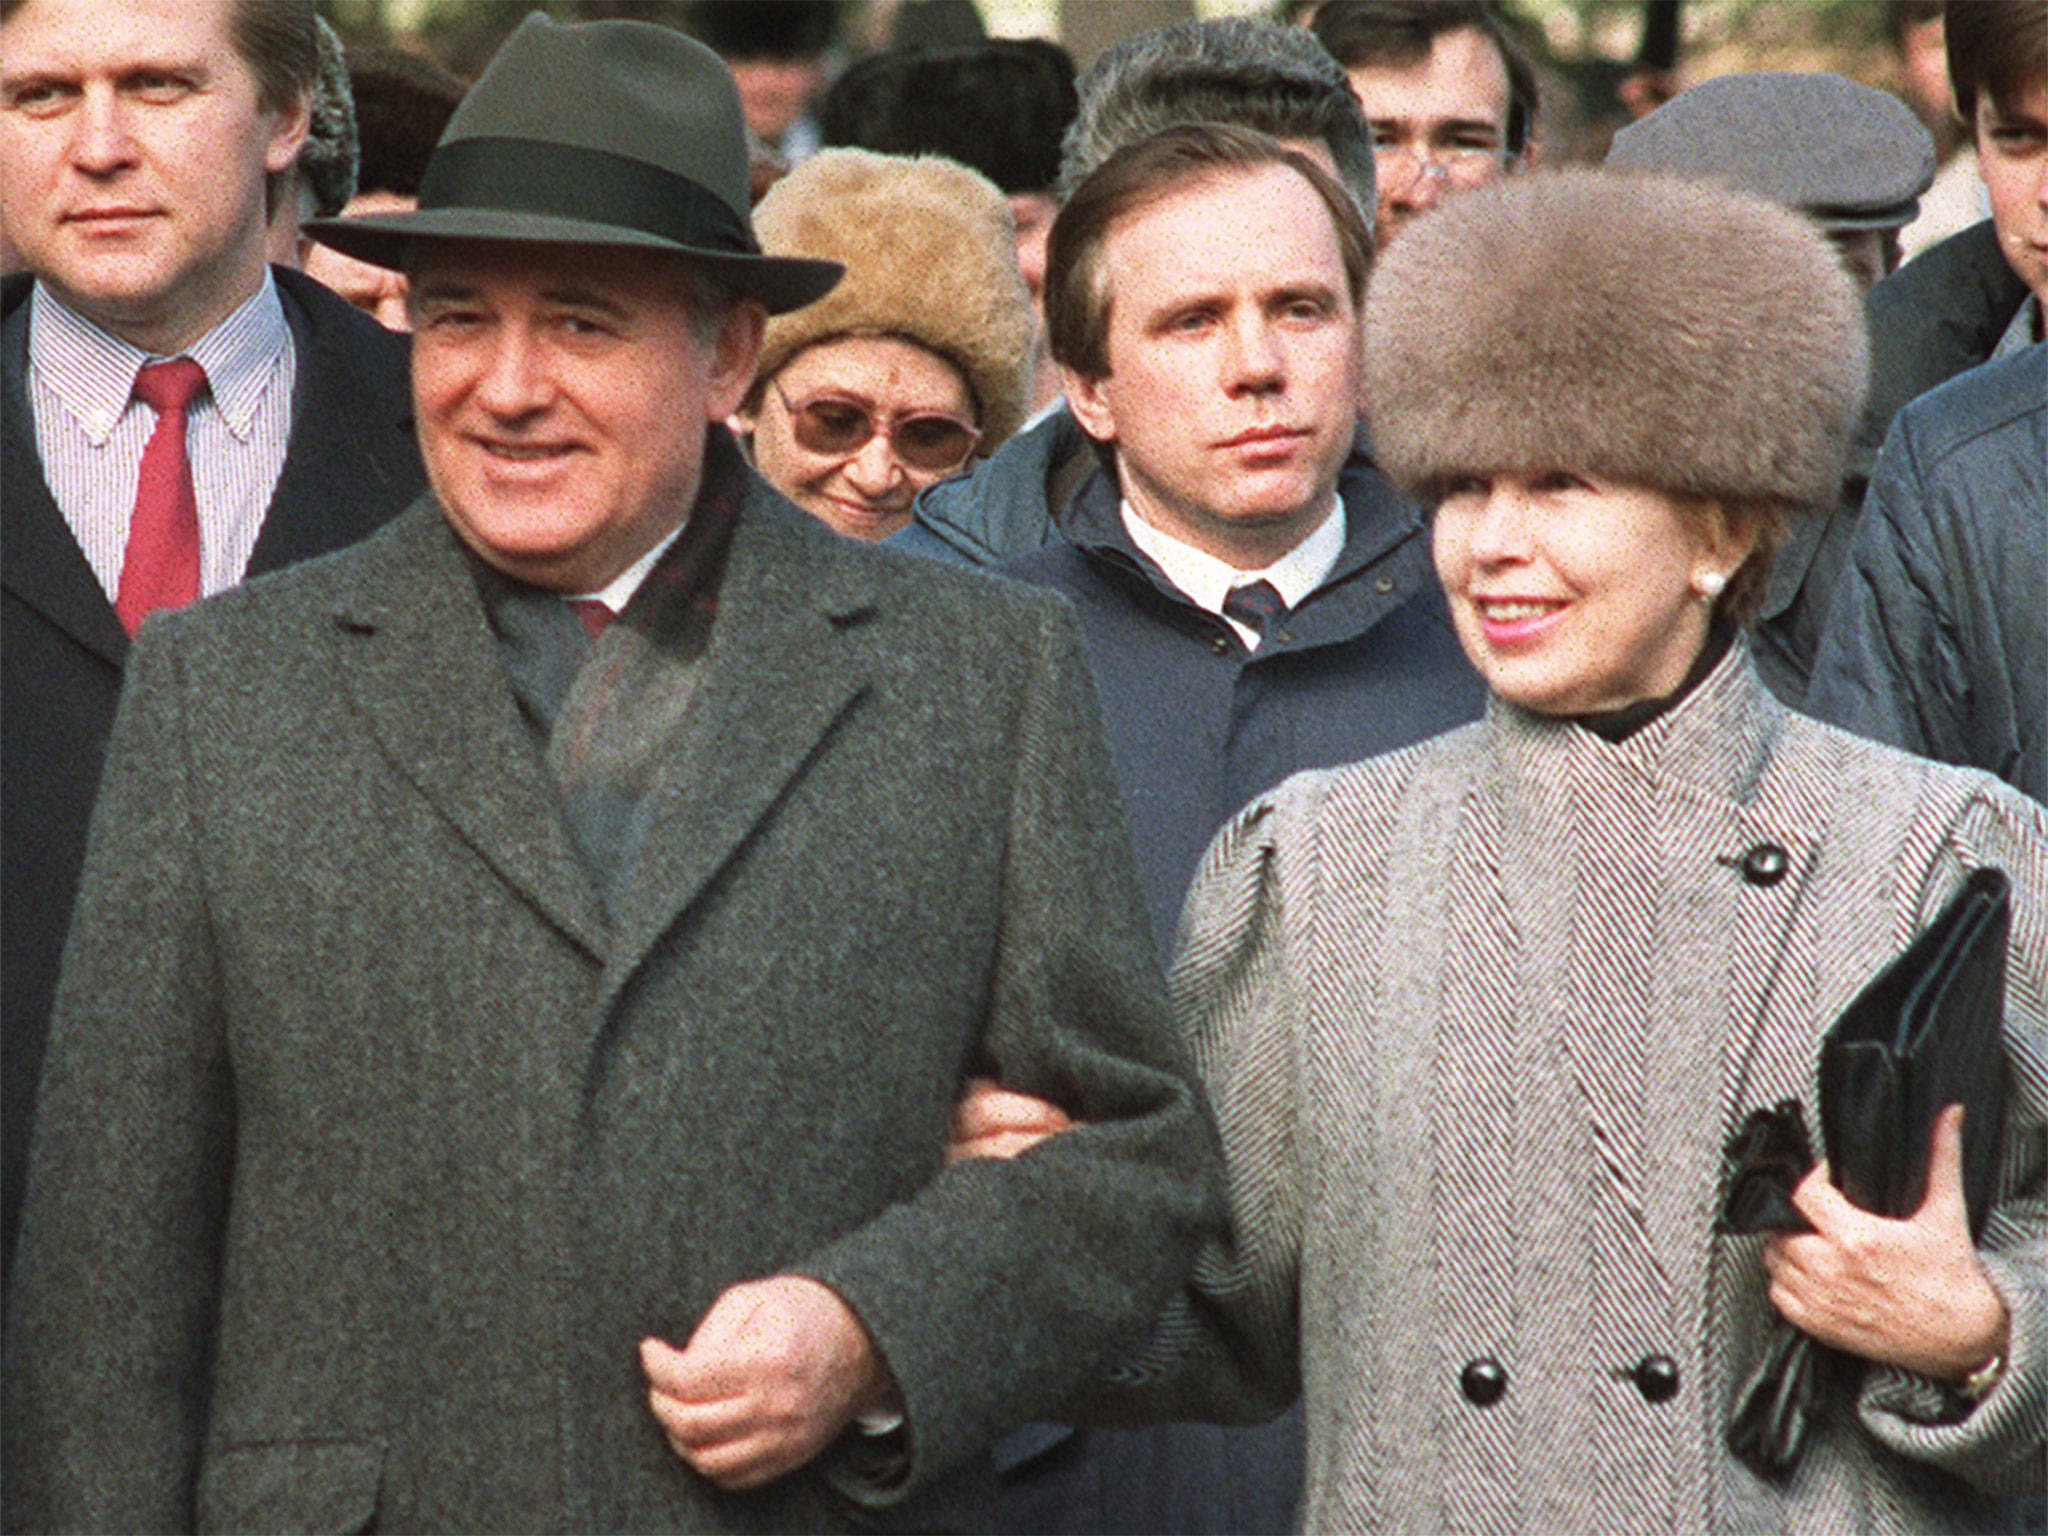 Mikhail Gorbachev with his wife Raisa in 1990. The couple married in 1953 and remained together until her death from leukaemia in 1999